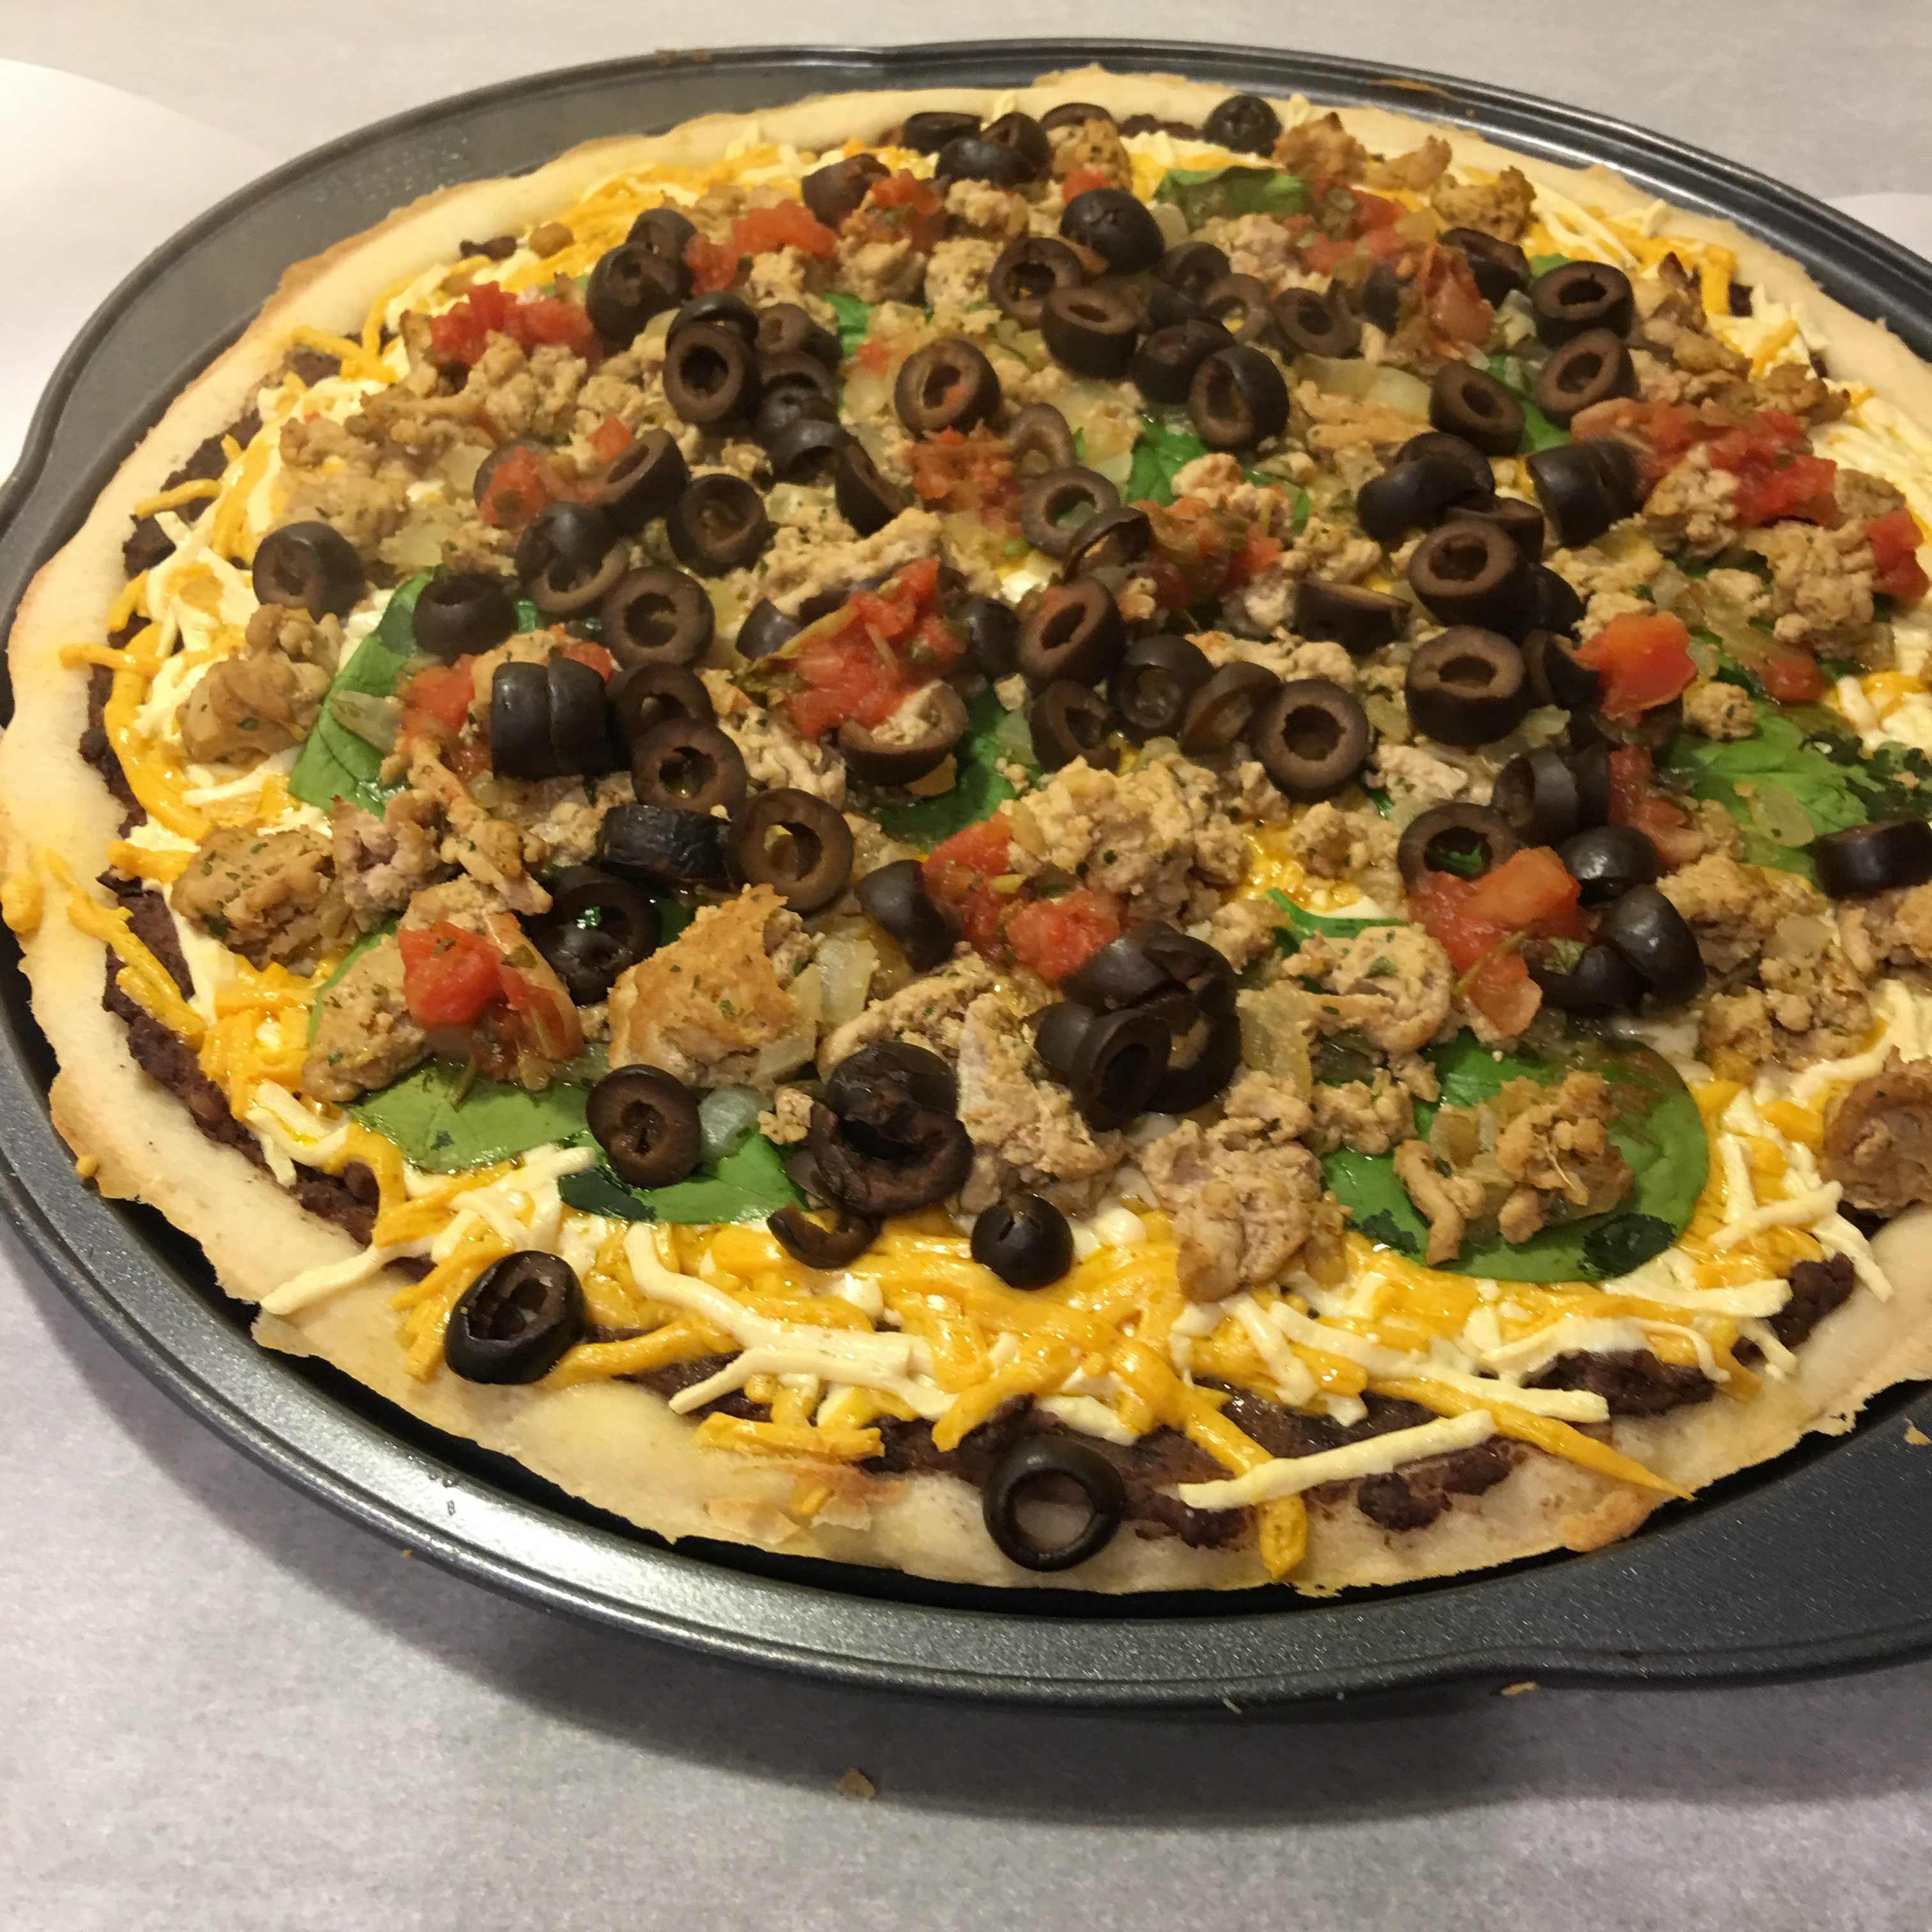 Allergy Friendly Gluten Free Dairy Free Taco Pizza by The Allergy Chef